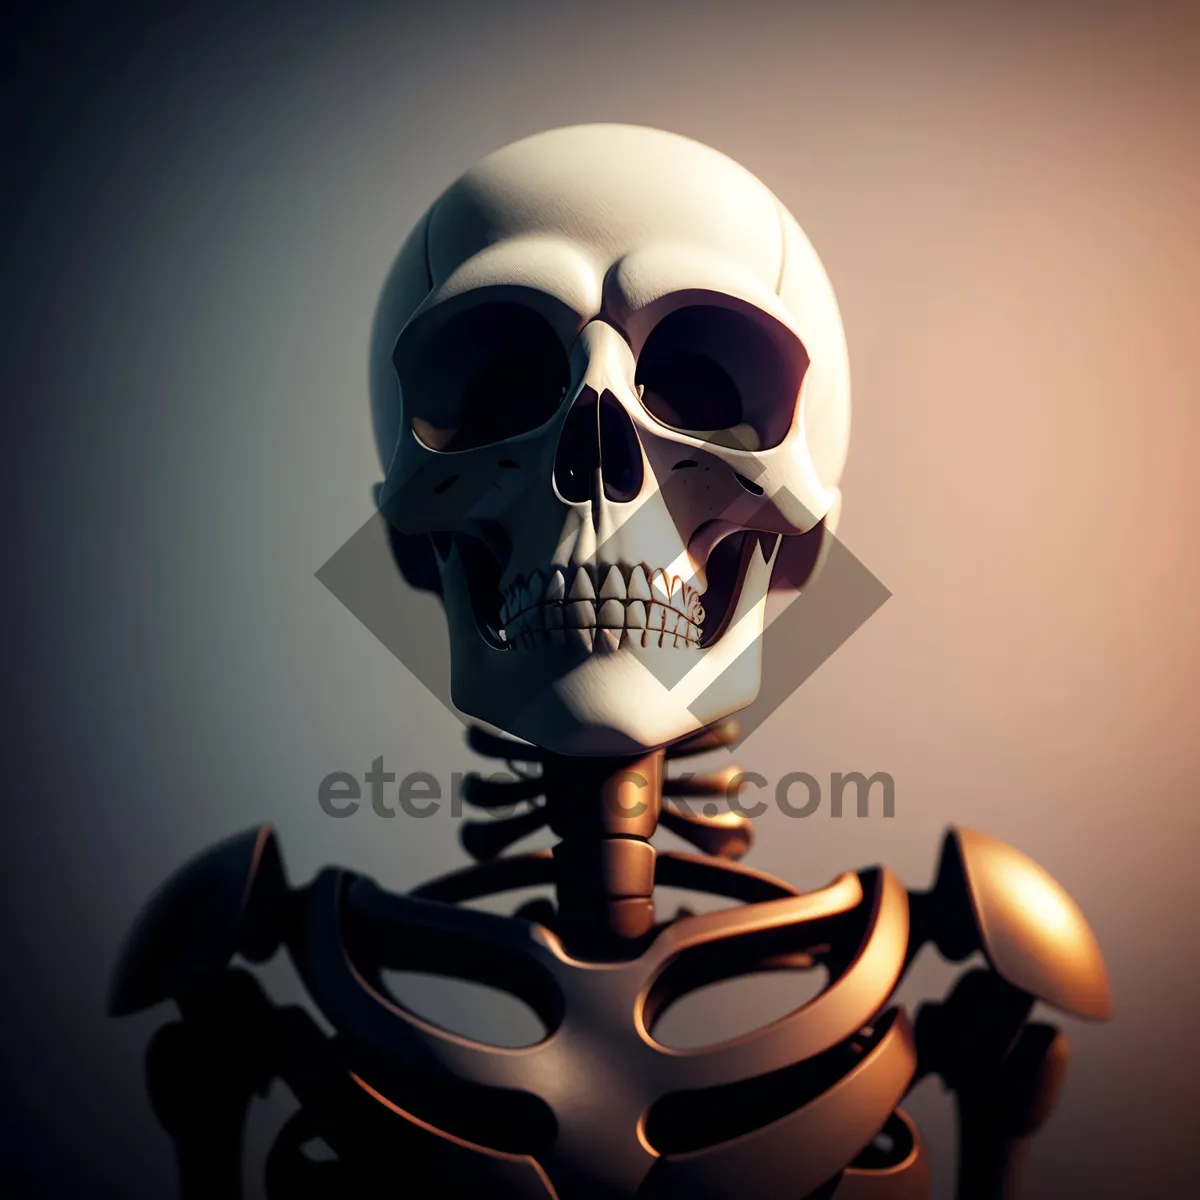 Picture of Pirate Skull: Terrifying Bone Sculpture with Spooky Cartoony Twist